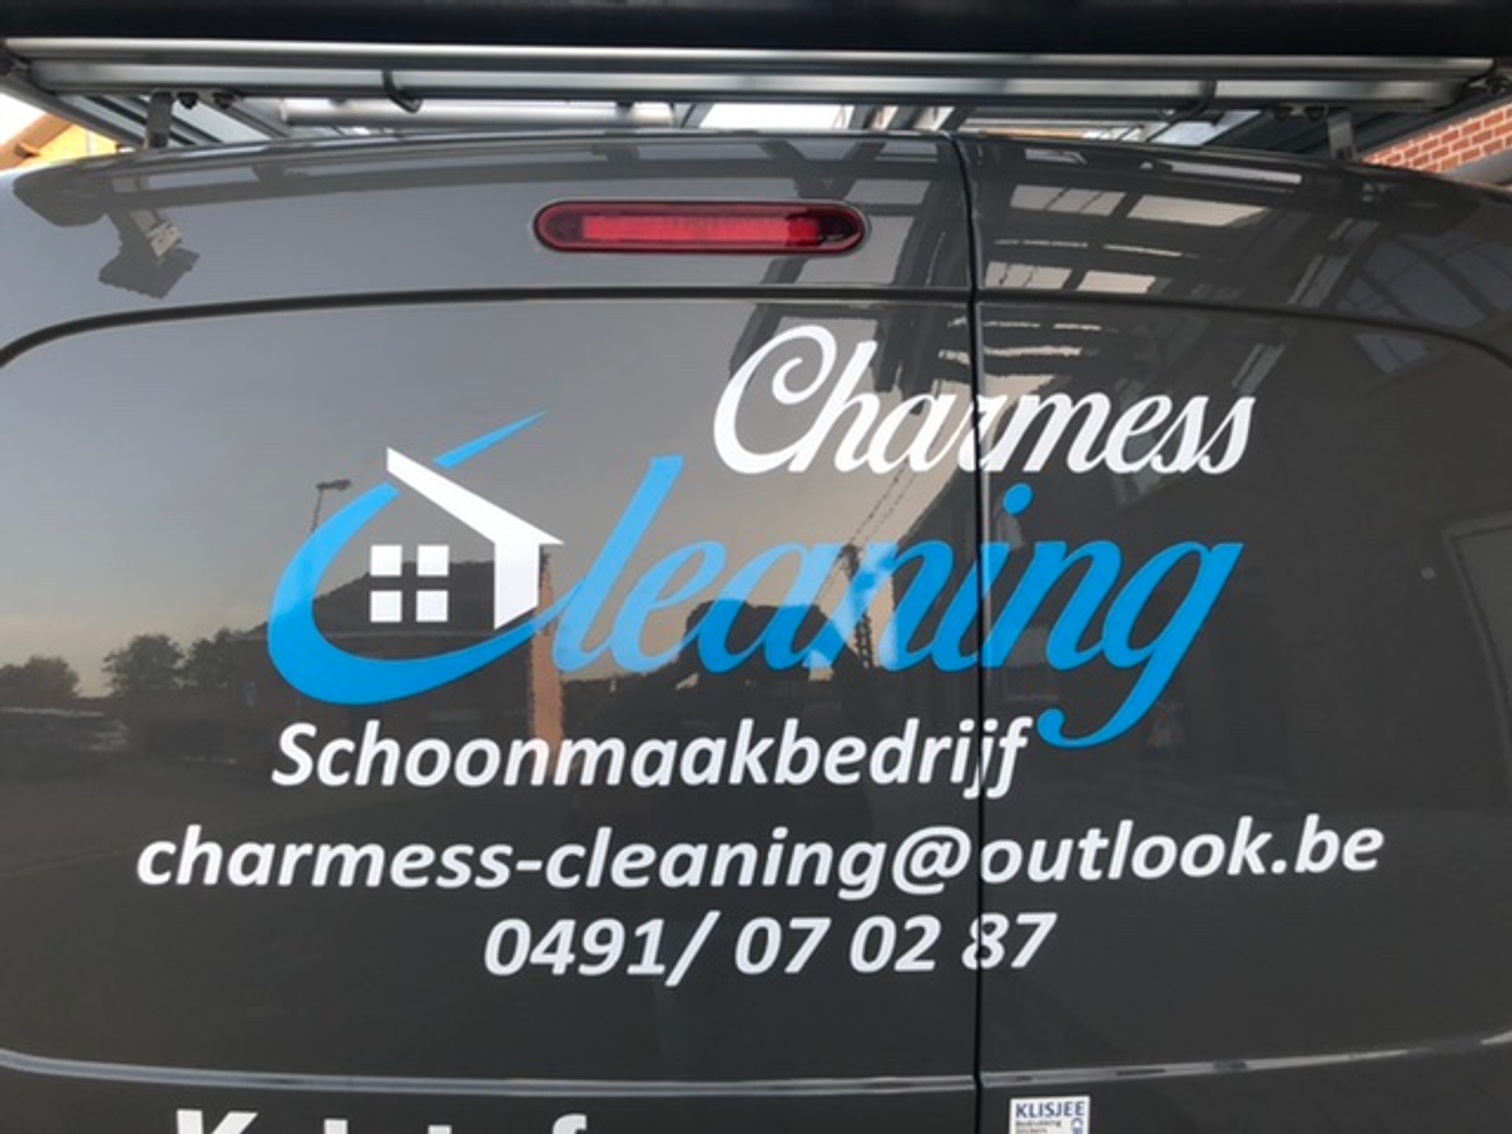 Charmess-cleaning logo